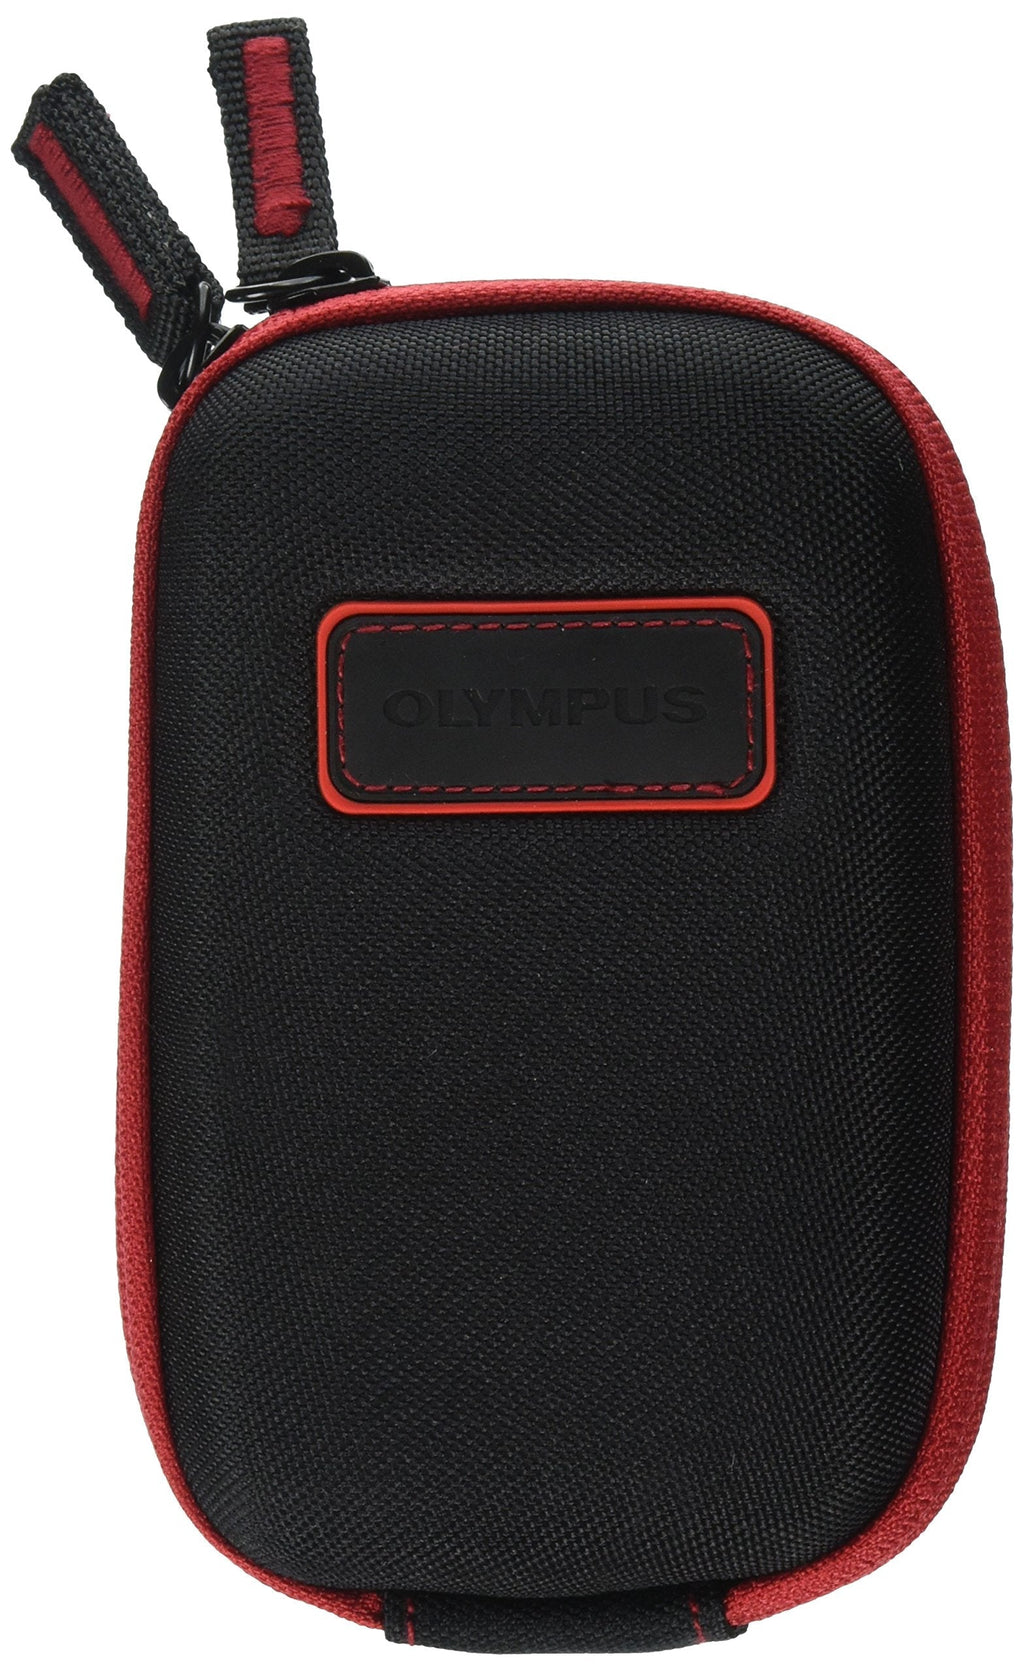 Olympus CSCH-107 Clamshell Hard Case for all TOUGH Cameras (Black with Red Trim)